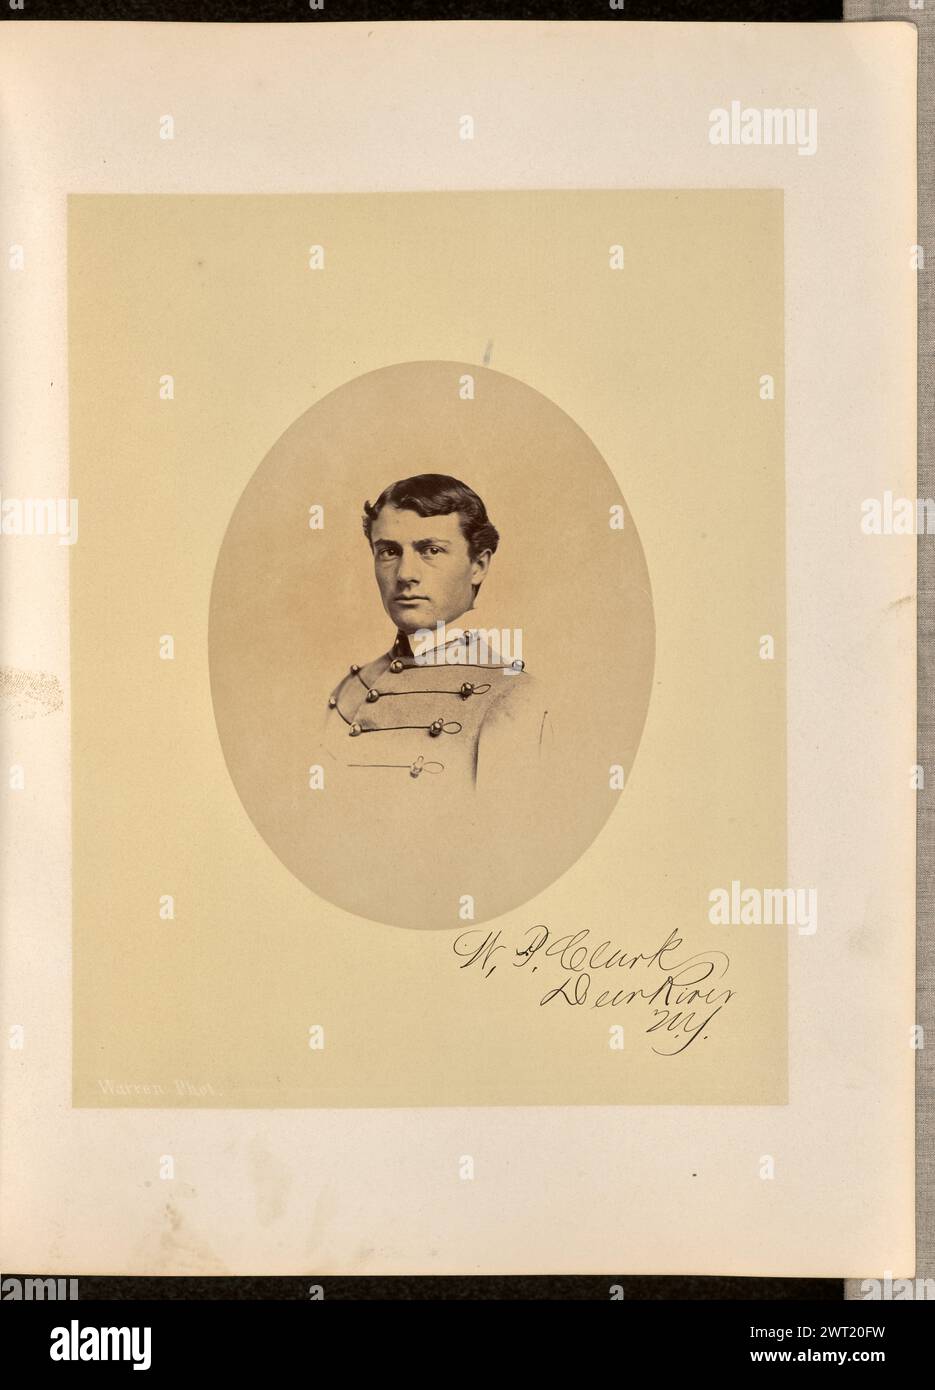 W.P. Clark, Deer River, N.Y.. George Kendall Warren, photographer (American, 1834 - 1884) 1868 Portrait of William Philo Clark dressed in a cadet uniform. He faces the left area of the image, with his gaze directed to the right area. (Recto, mount) lower right, in black ink, in the sitter's hand: 'W.P. Clark / Deer River / N.Y.'; Stock Photo